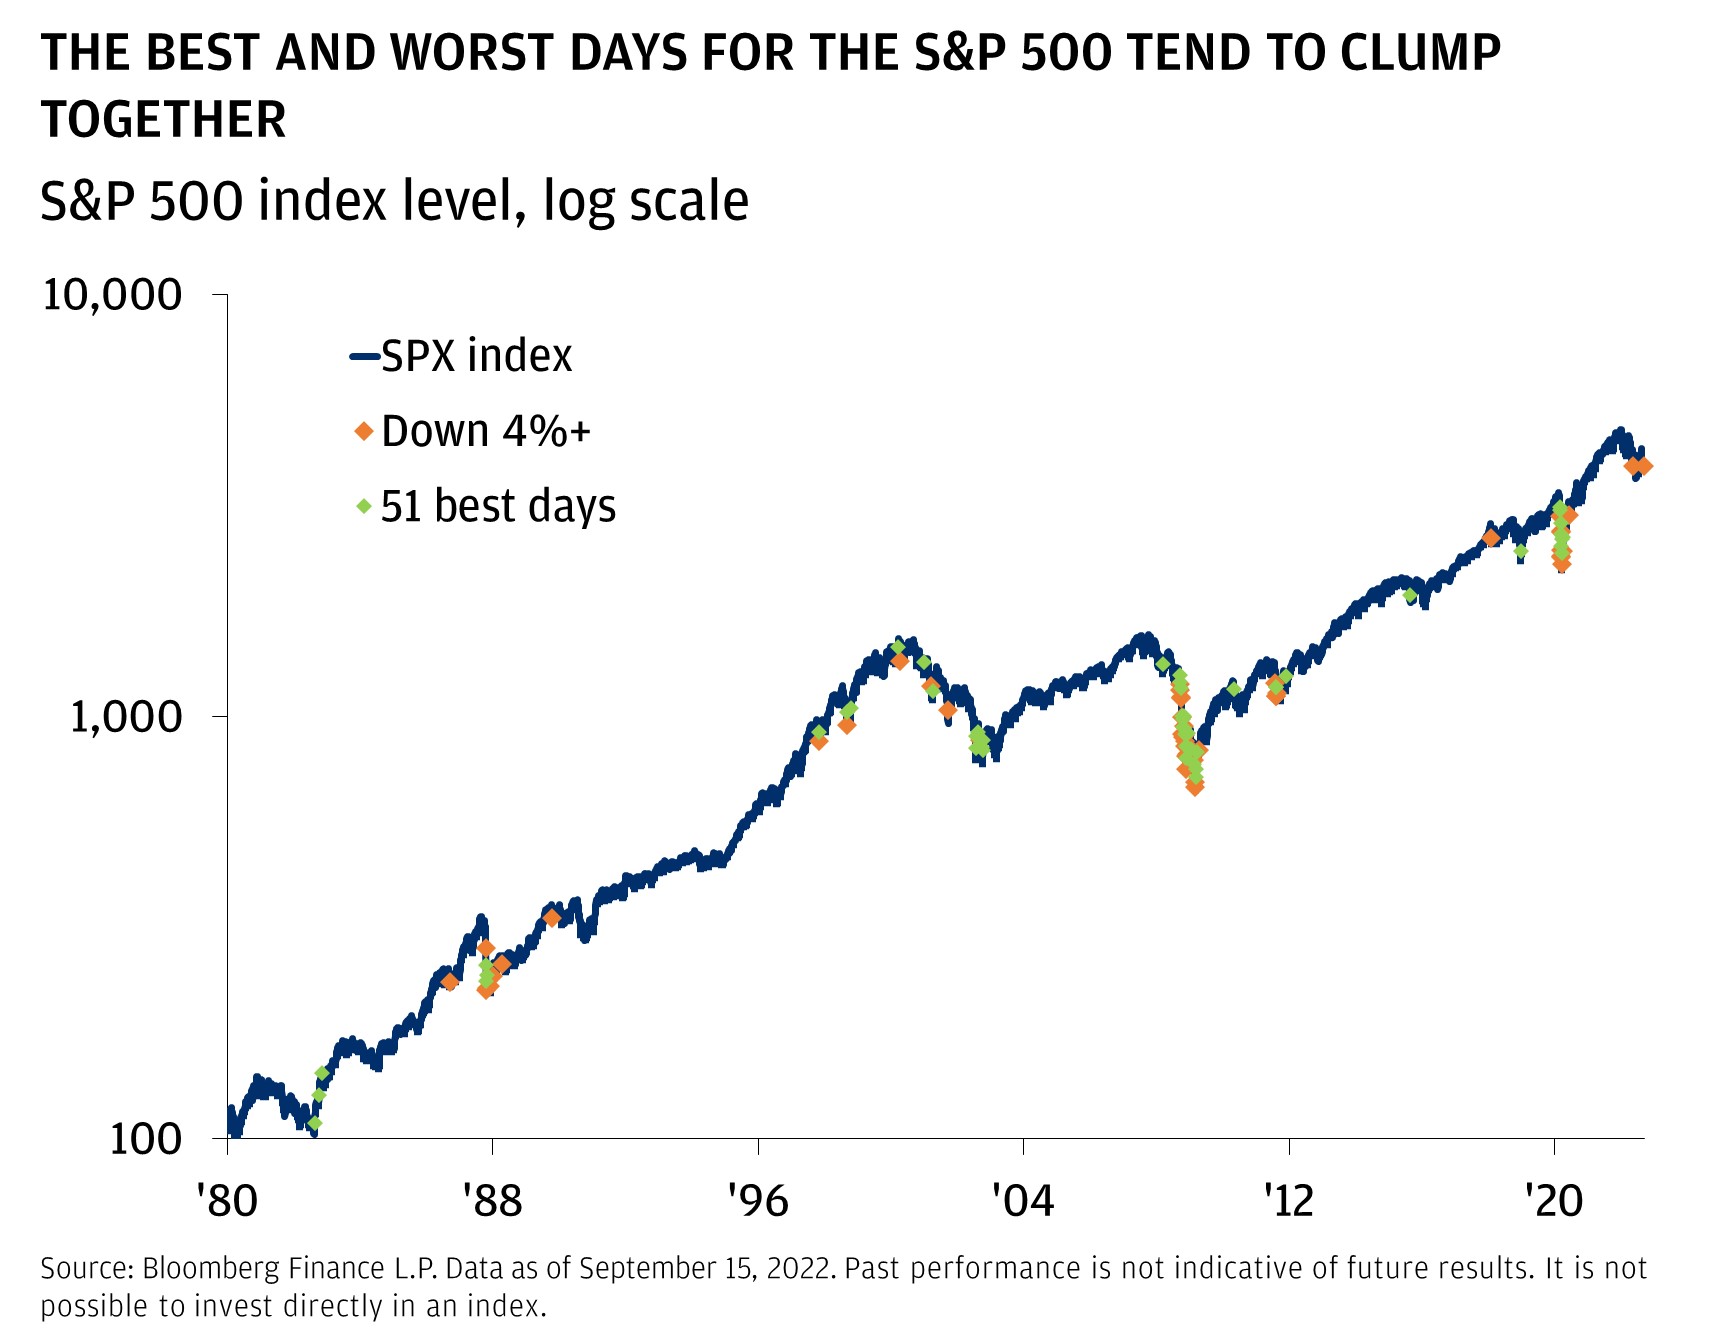 This chart shows the log scale S&P 500 from 1980 to 2022 and shows the best days in the S&P500 in green and the worst days (S&P 500 down by 4%+) in orange.